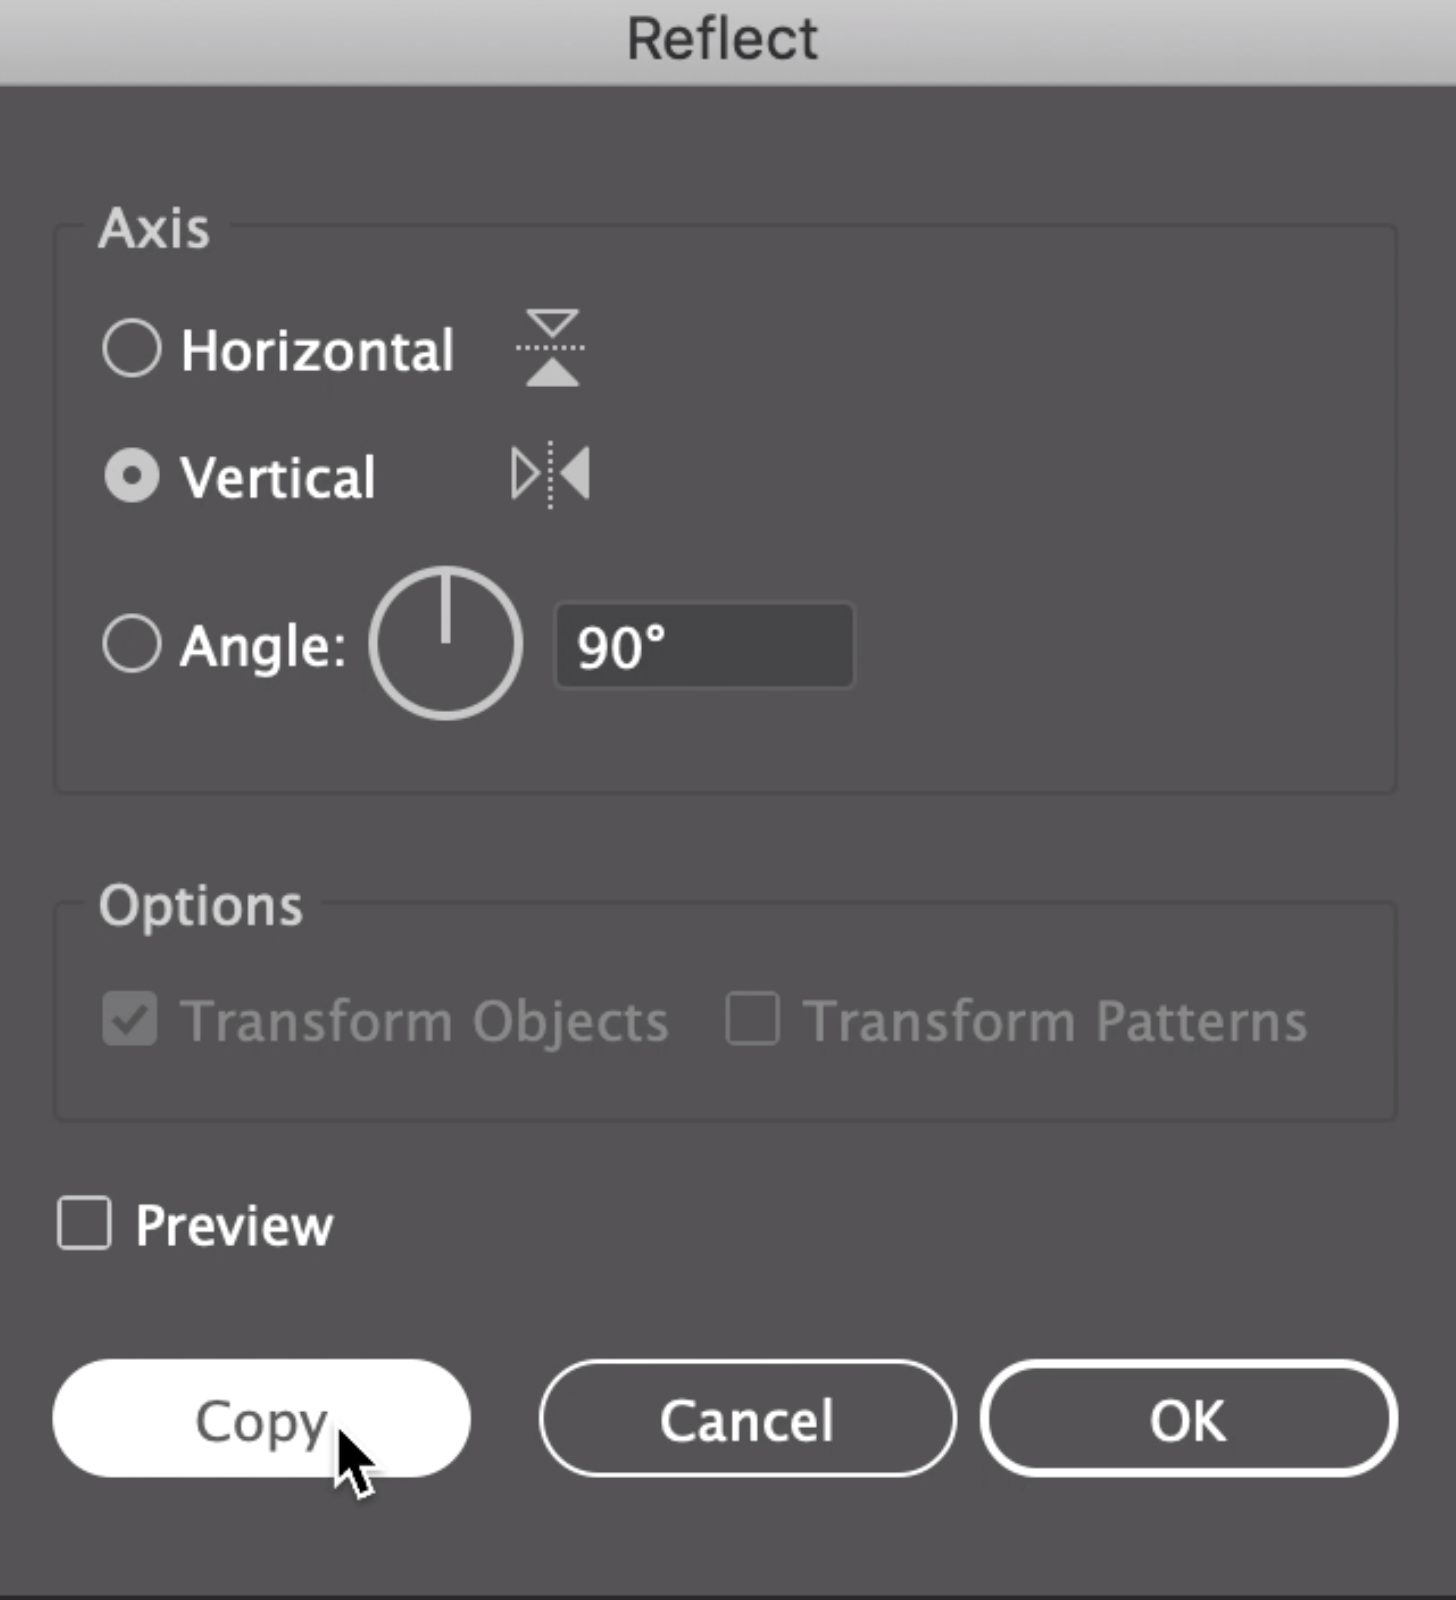 The axis is set to vertical and Copy option is selected